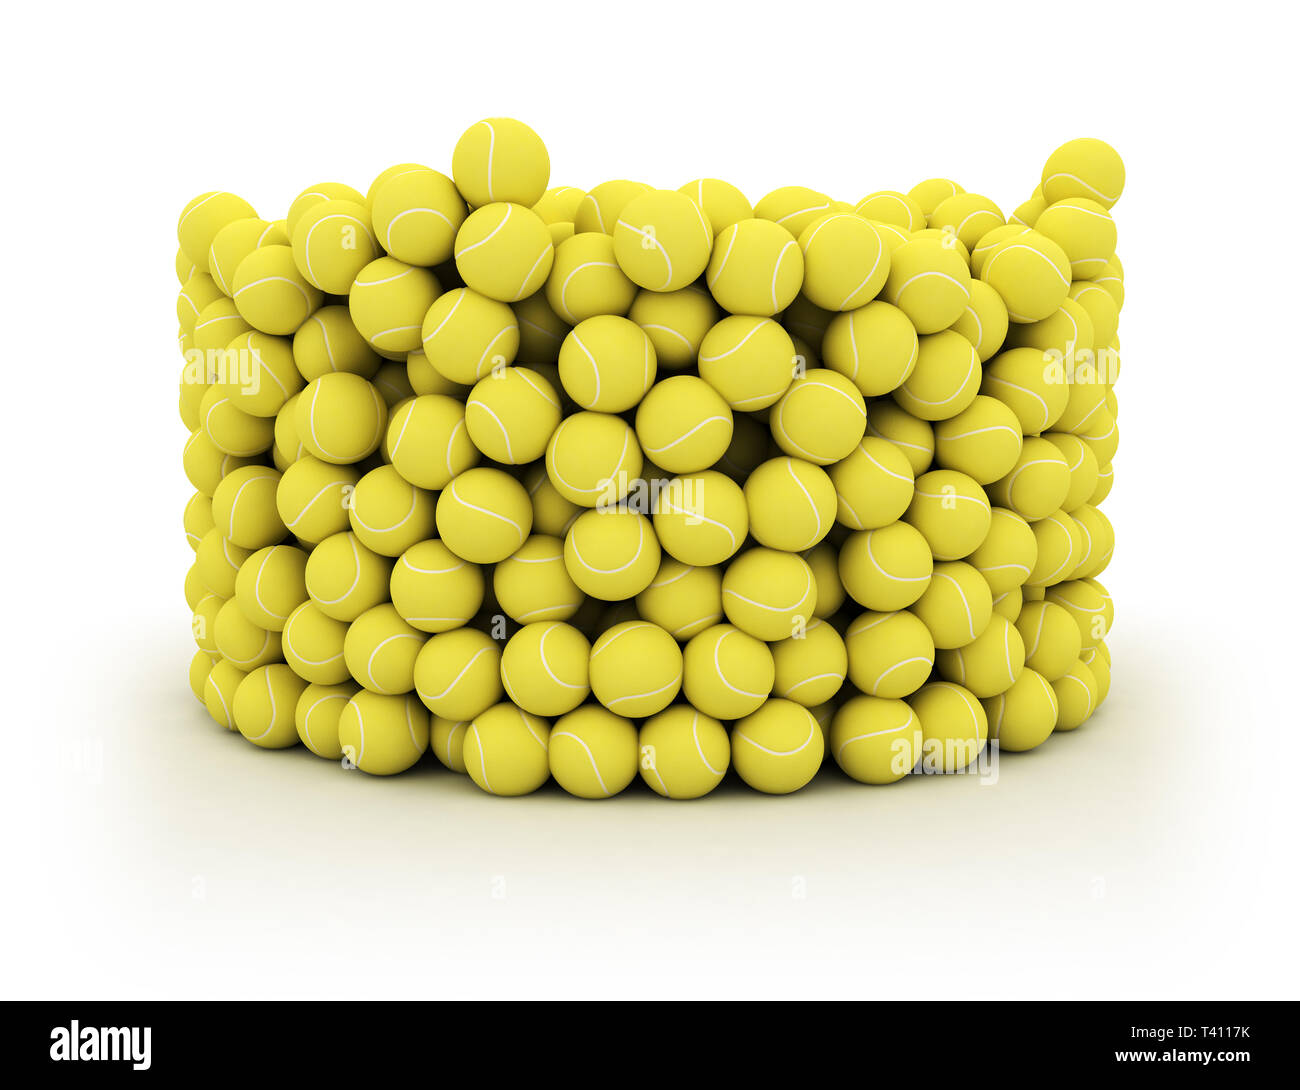 Group of yellow tennis balls in a cyliner bucket shape isolated on white background Stock Photo